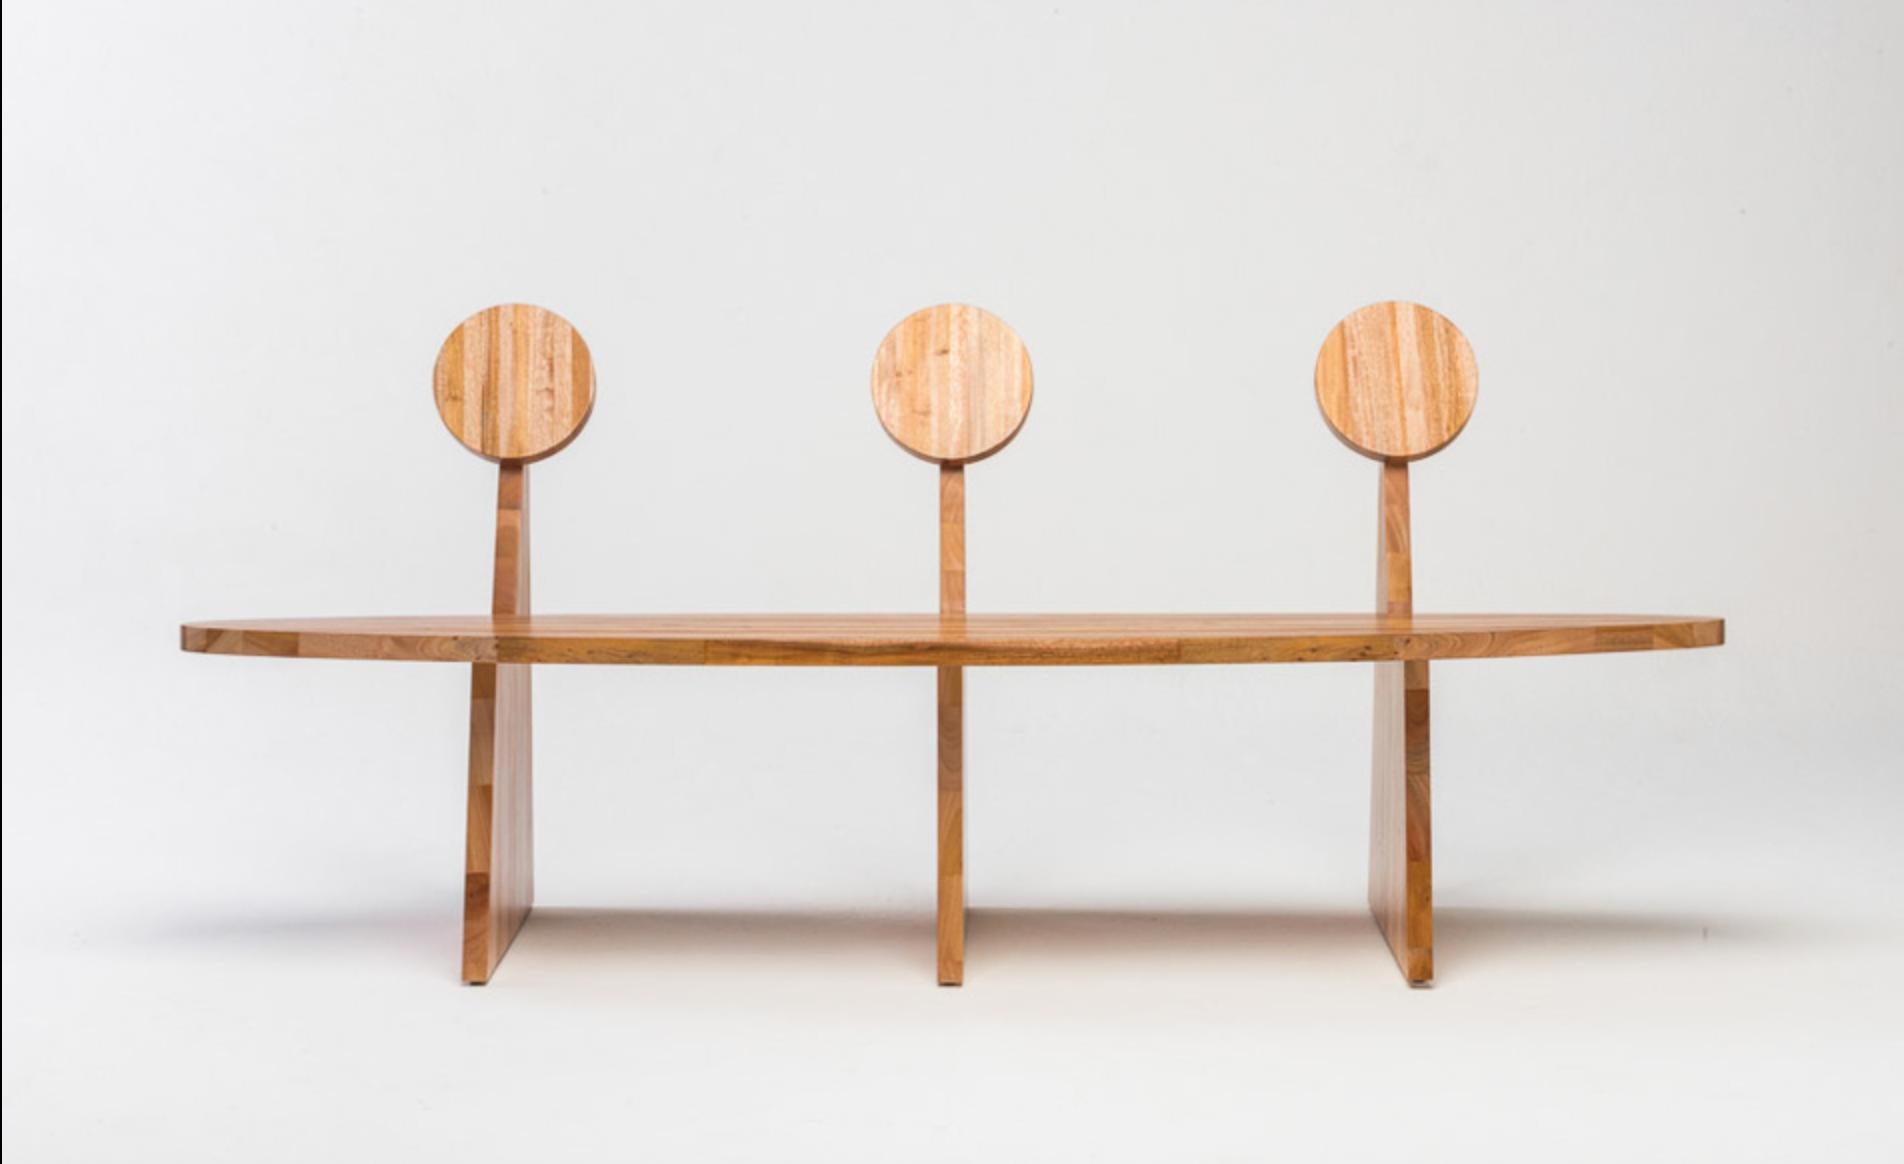 Designed by Juliana Lima Vasconcellos in 2018, the trio bench in made in solid African mahogany wood panels. This bench has a contemporary and simple image, inspired by pure geometric shapes and furniture of pre-modernist architects. The